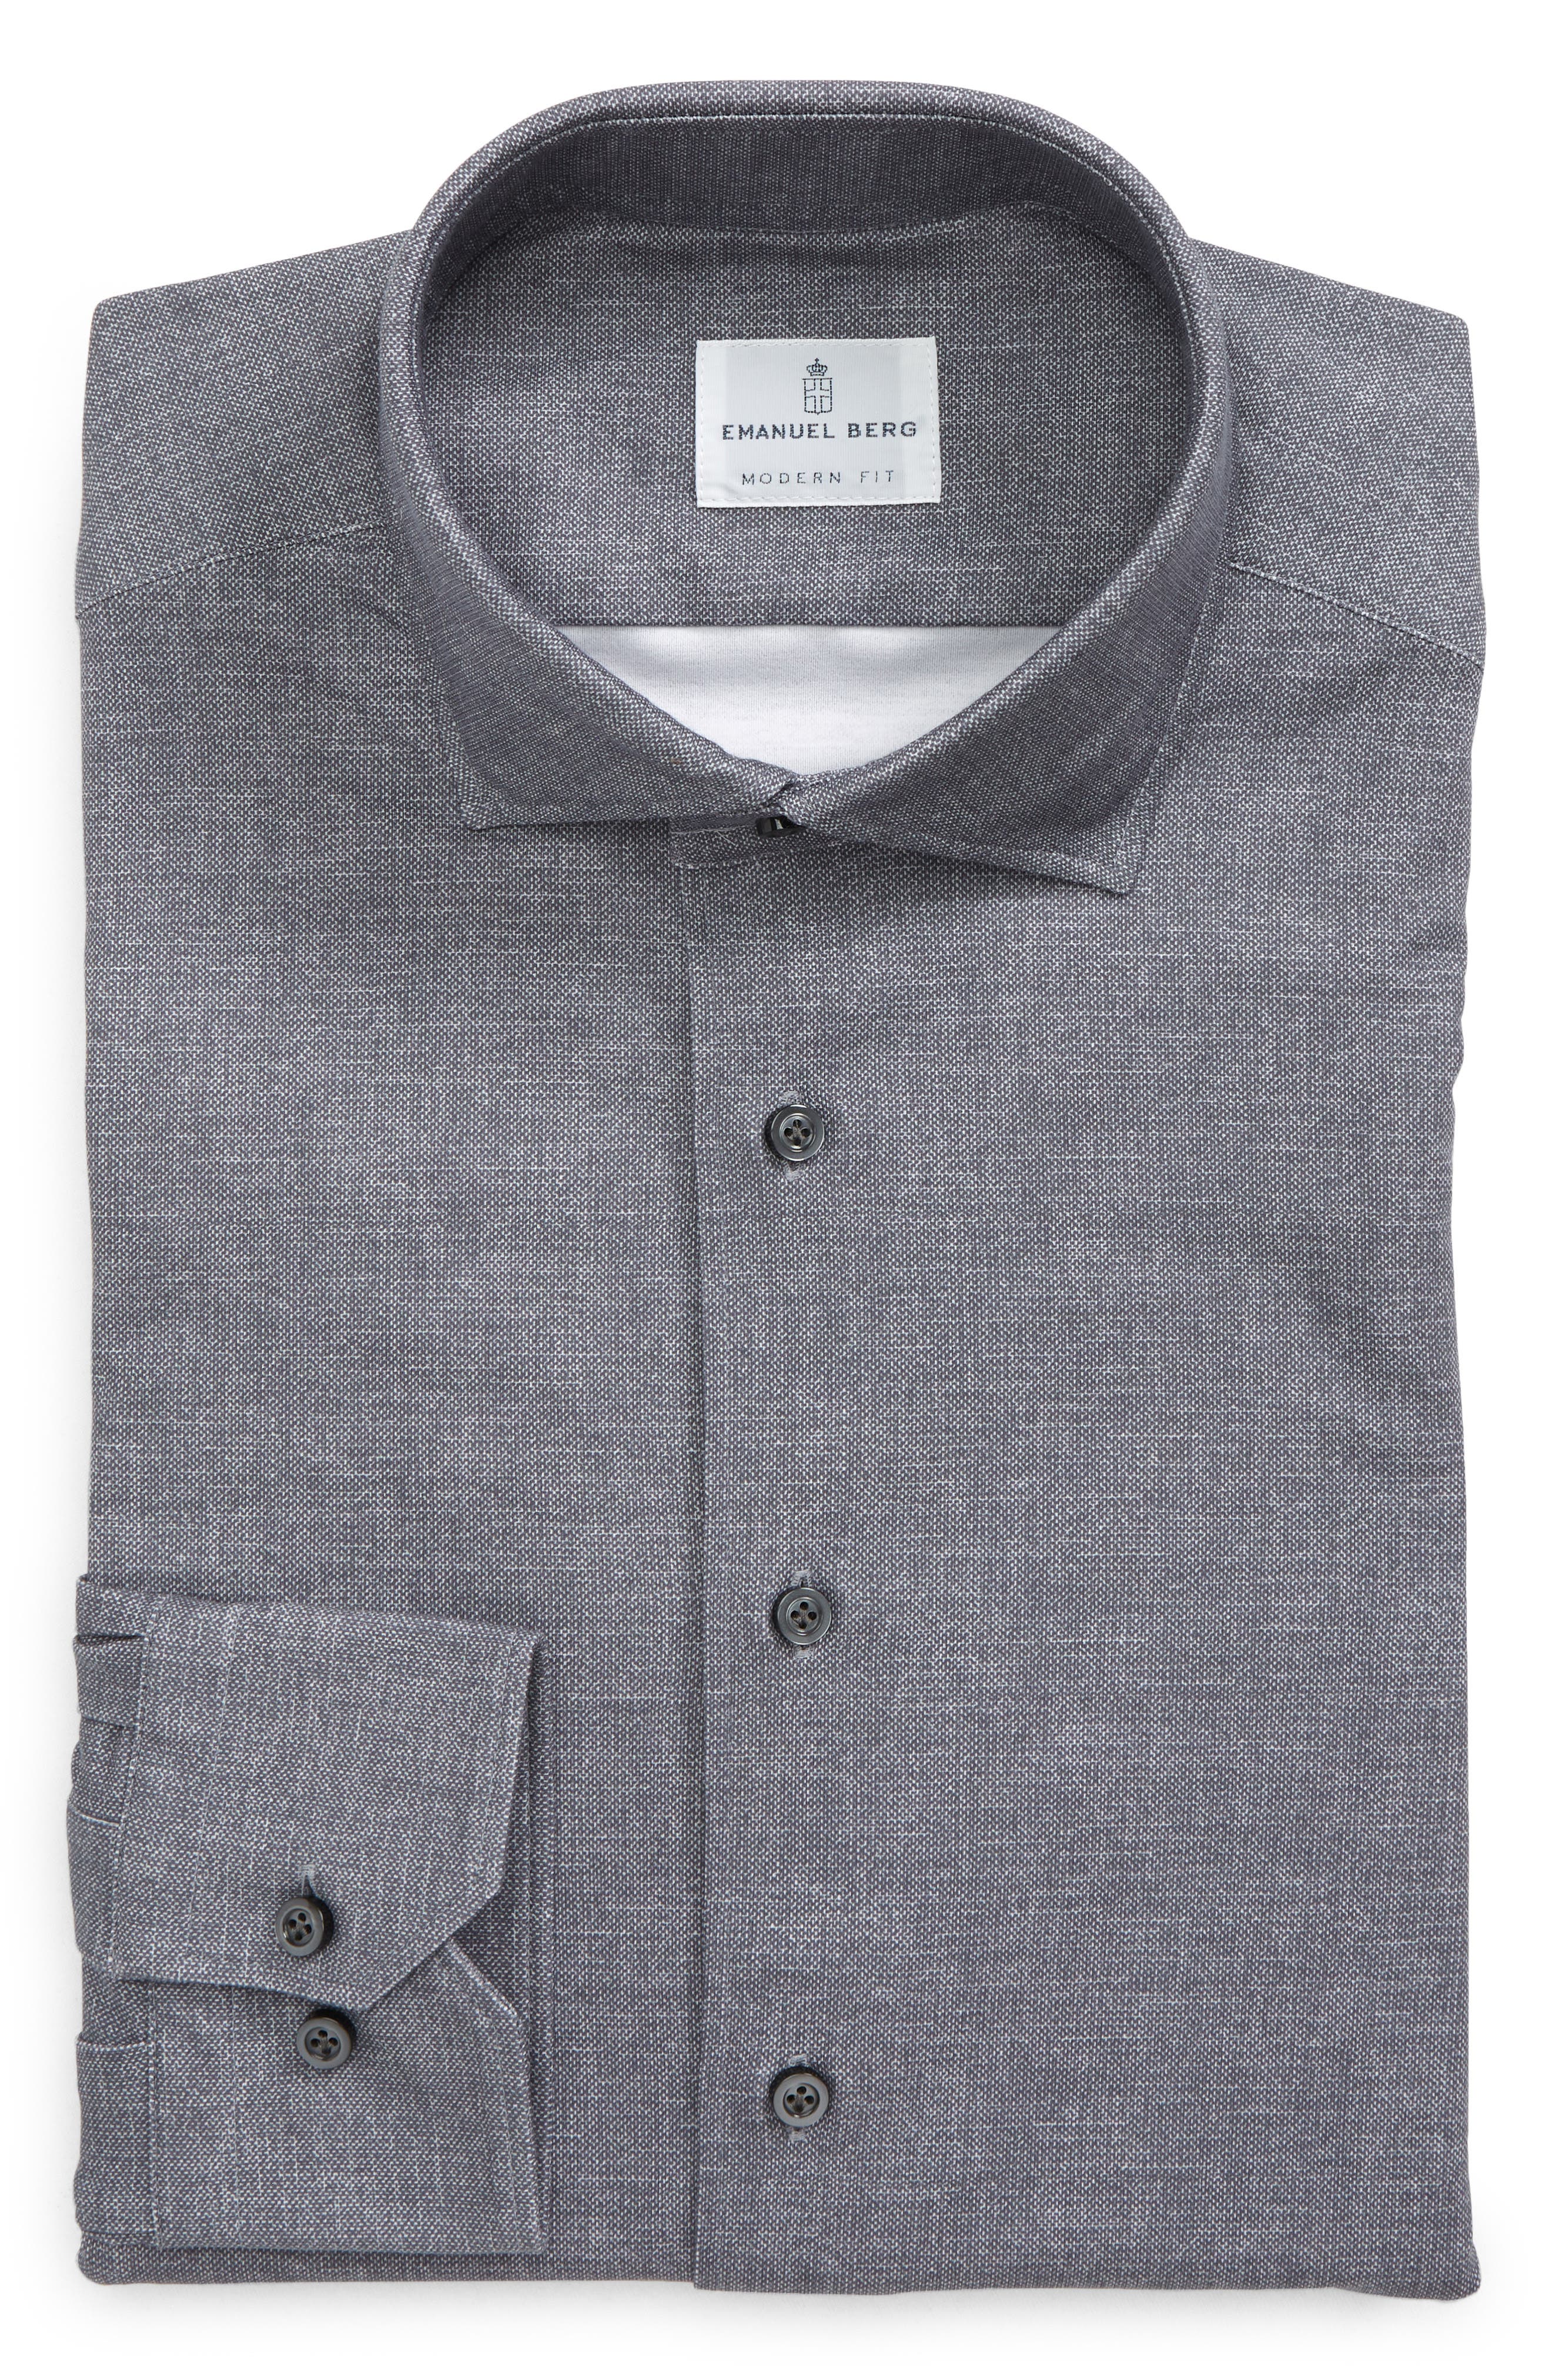 Emanuel Berg 4Flex Knit Modern Fit Long Sleeve Button-Up Shirt in Charcoal at Nordstrom